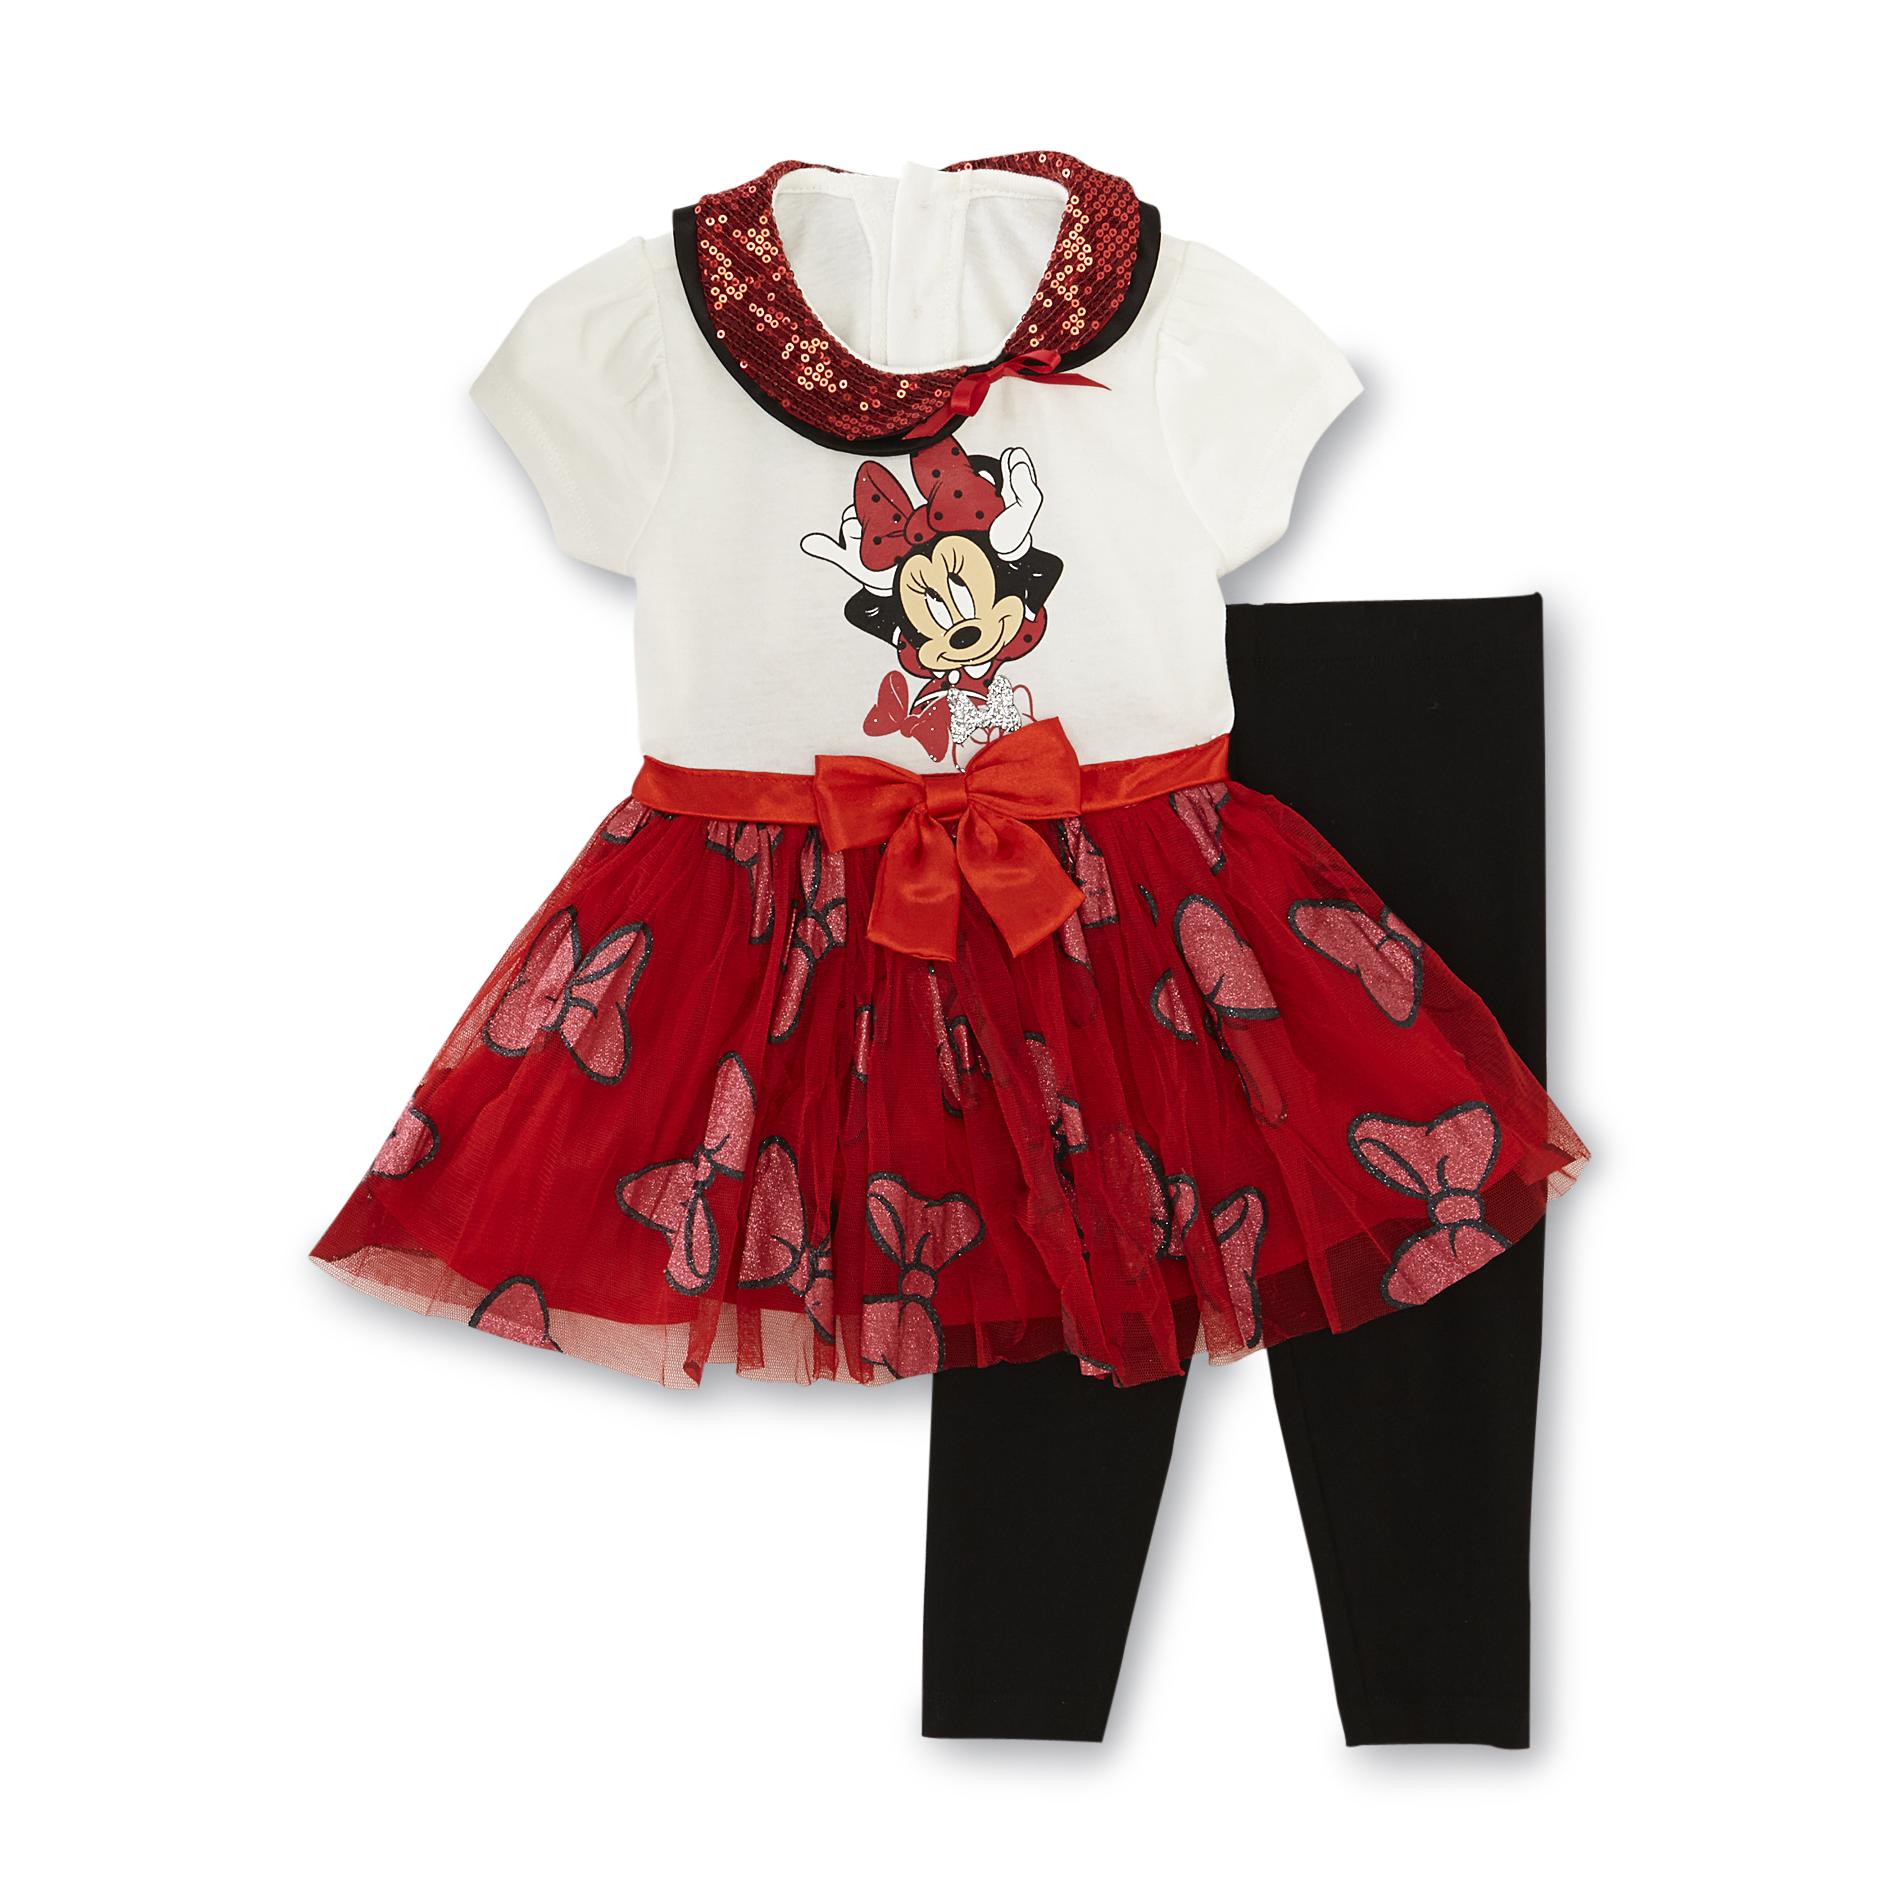 Disney Minnie Mouse Infant & Toddler Girl's Tunic Top & Leggings